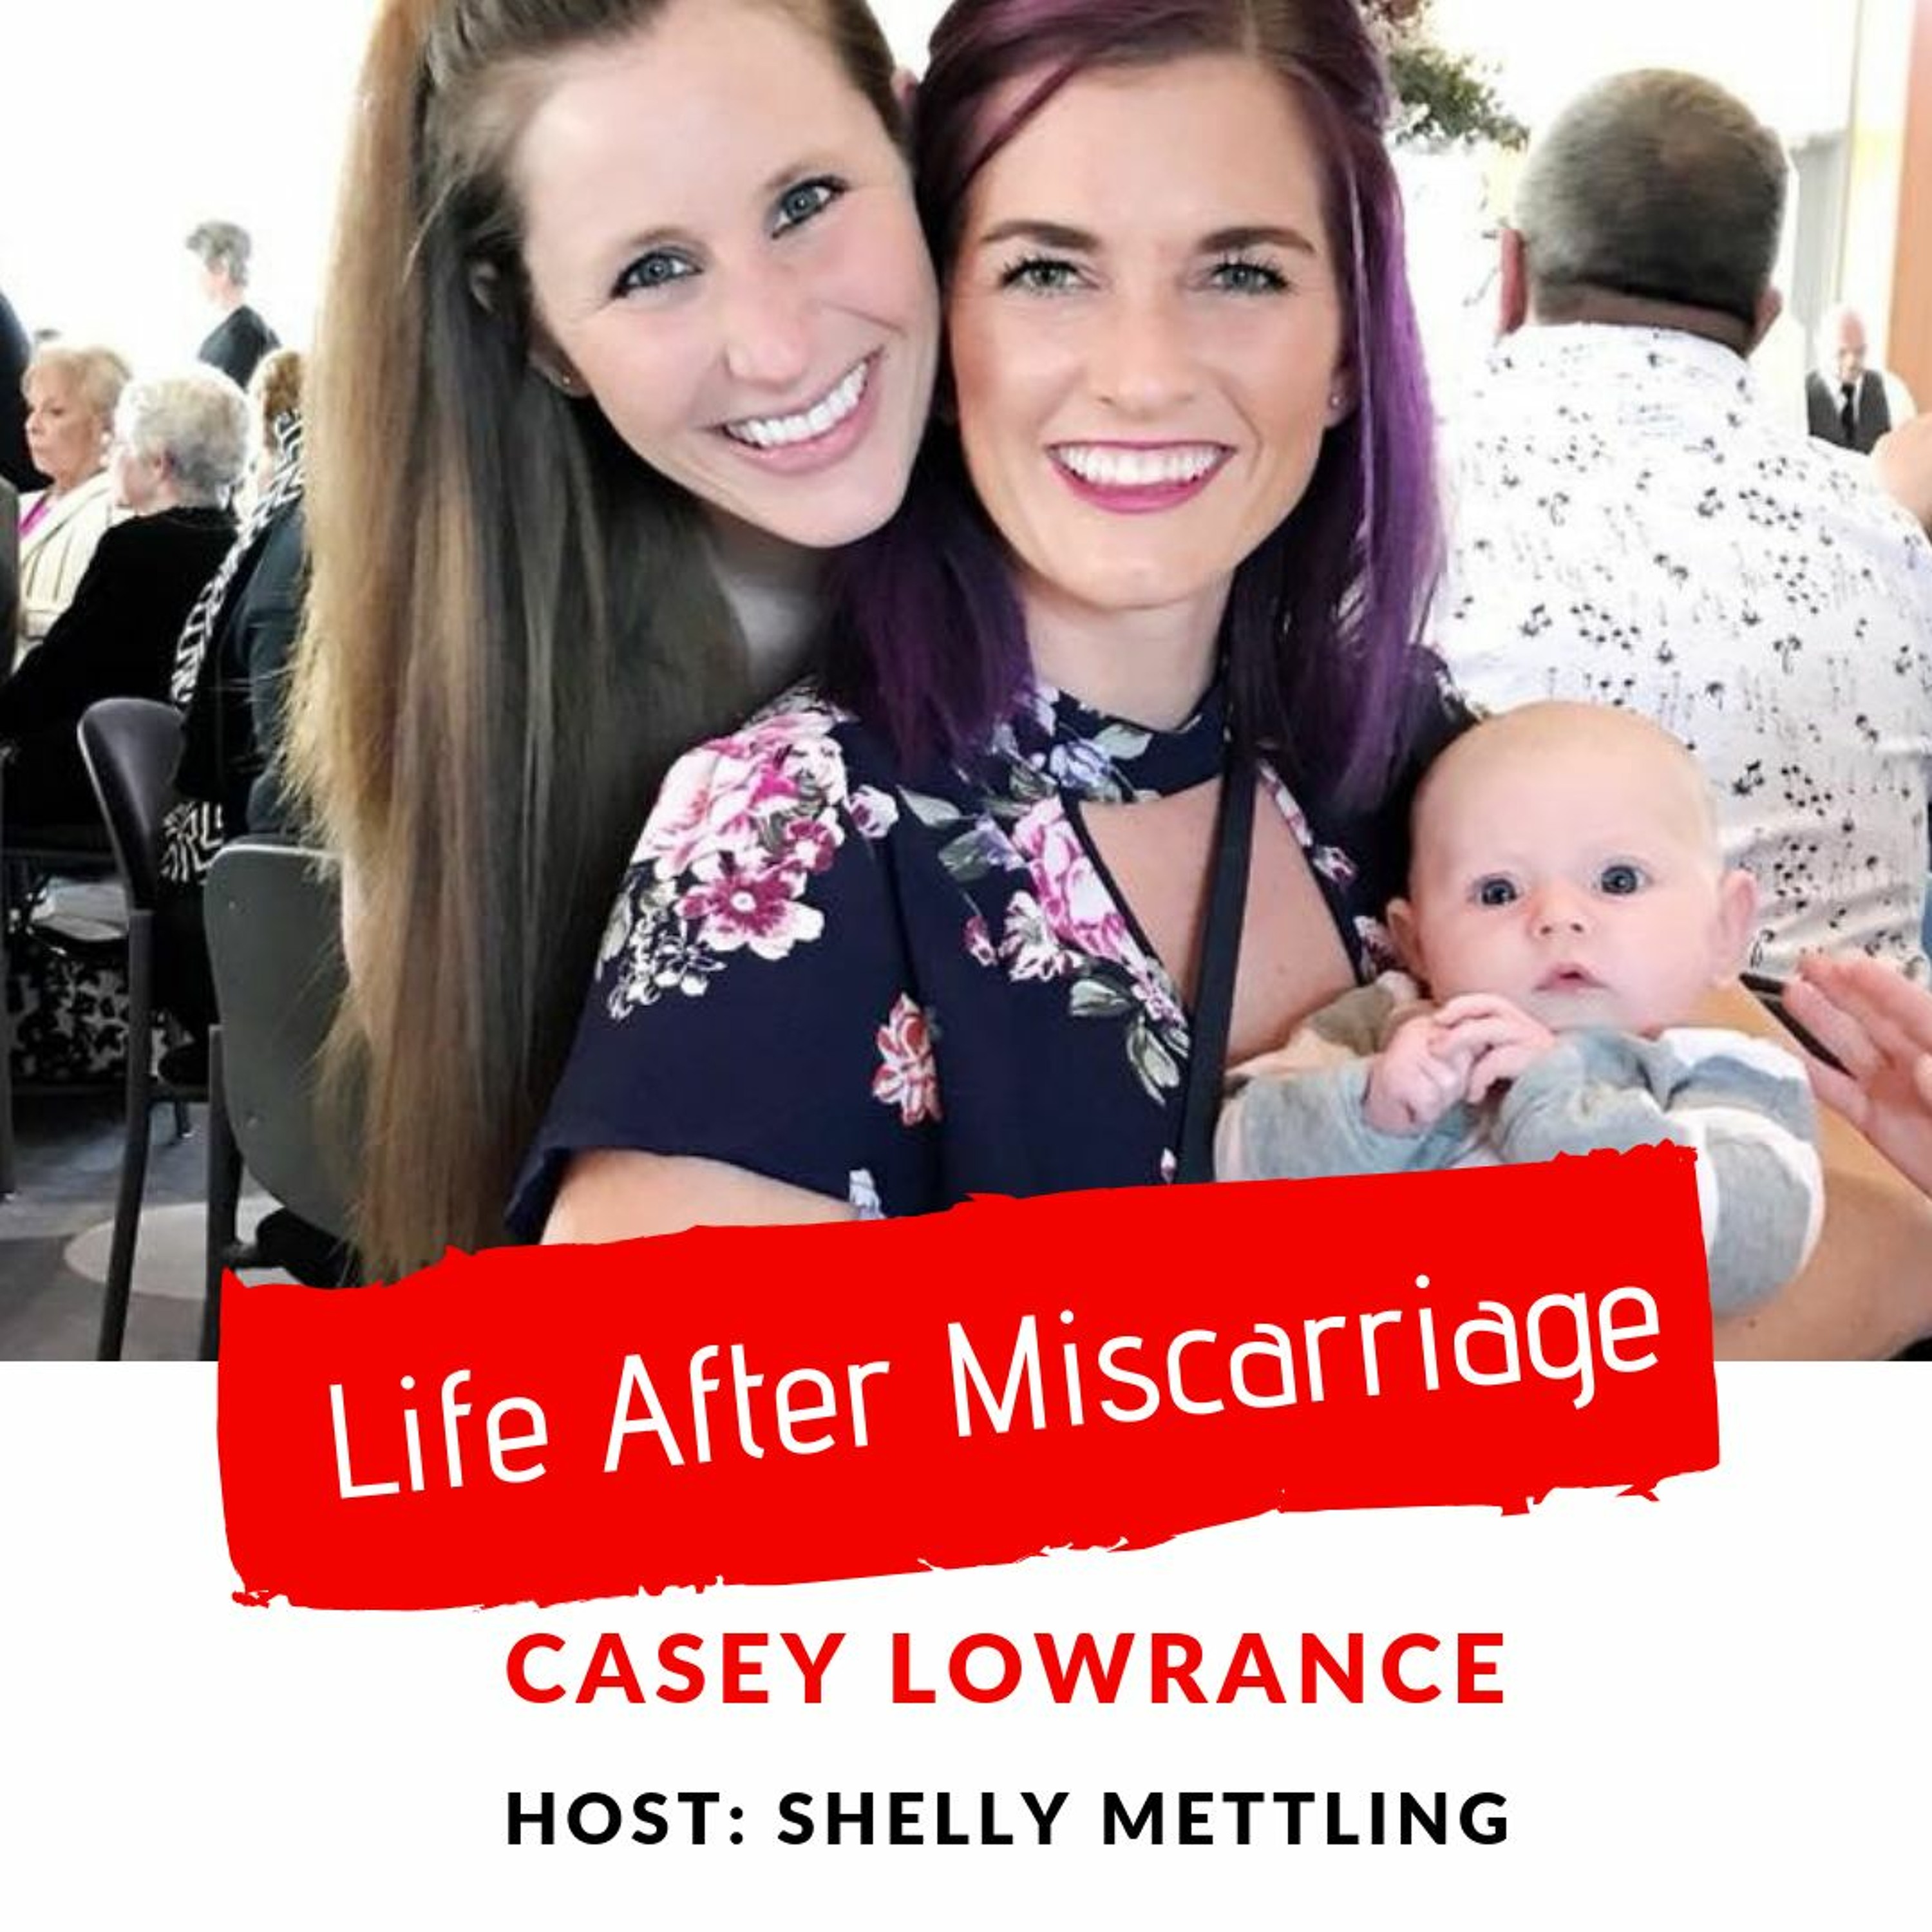 CASEY LOWRANCE - Friendships during Miscarriage